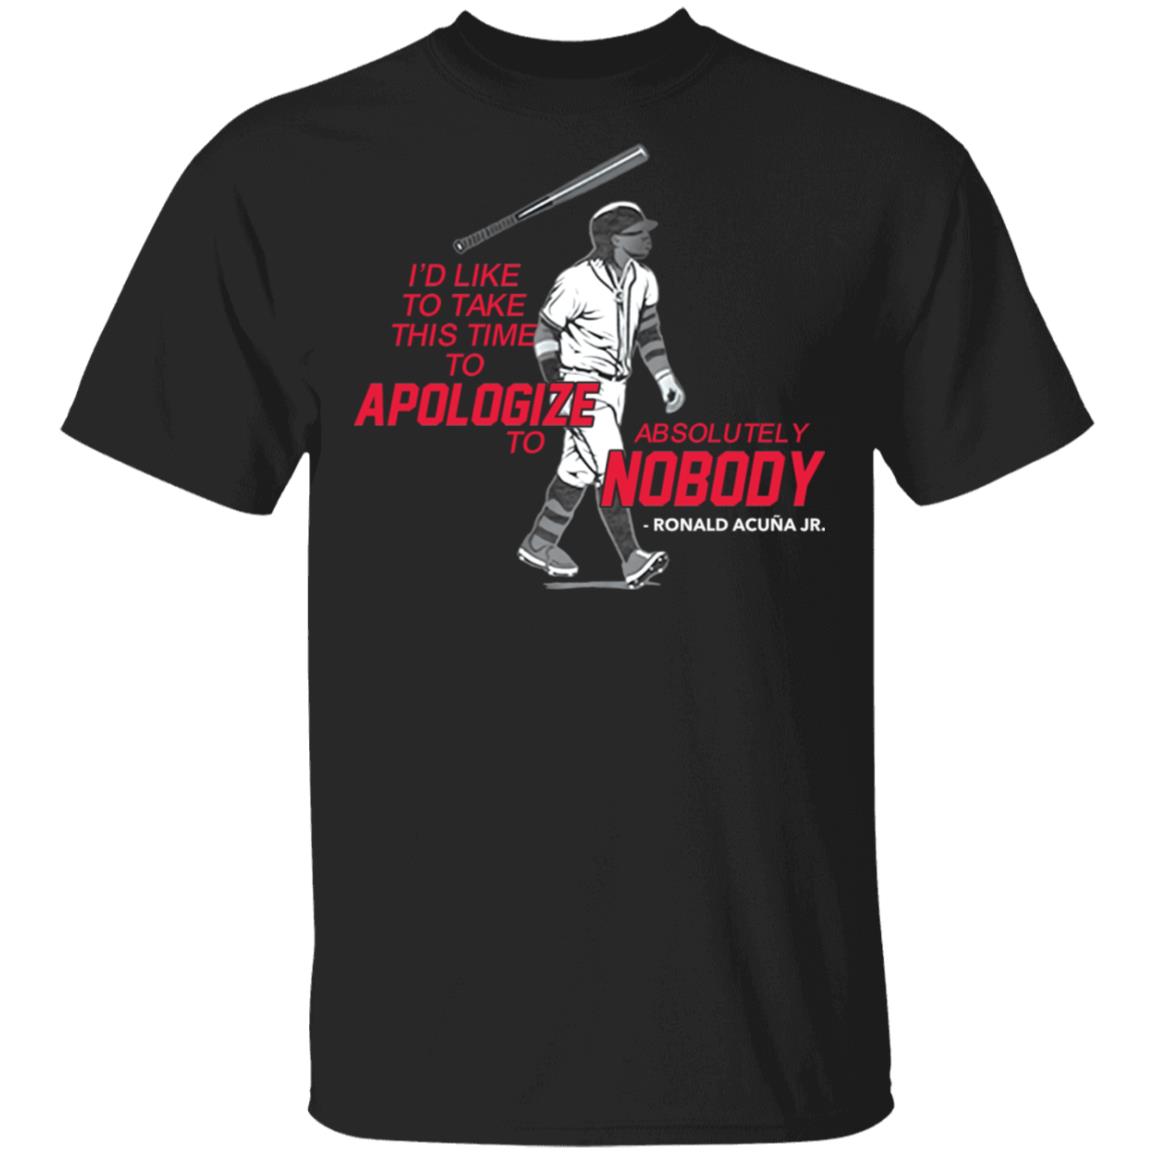 I'd like to take this time to apologize to absolutely nobody shirt